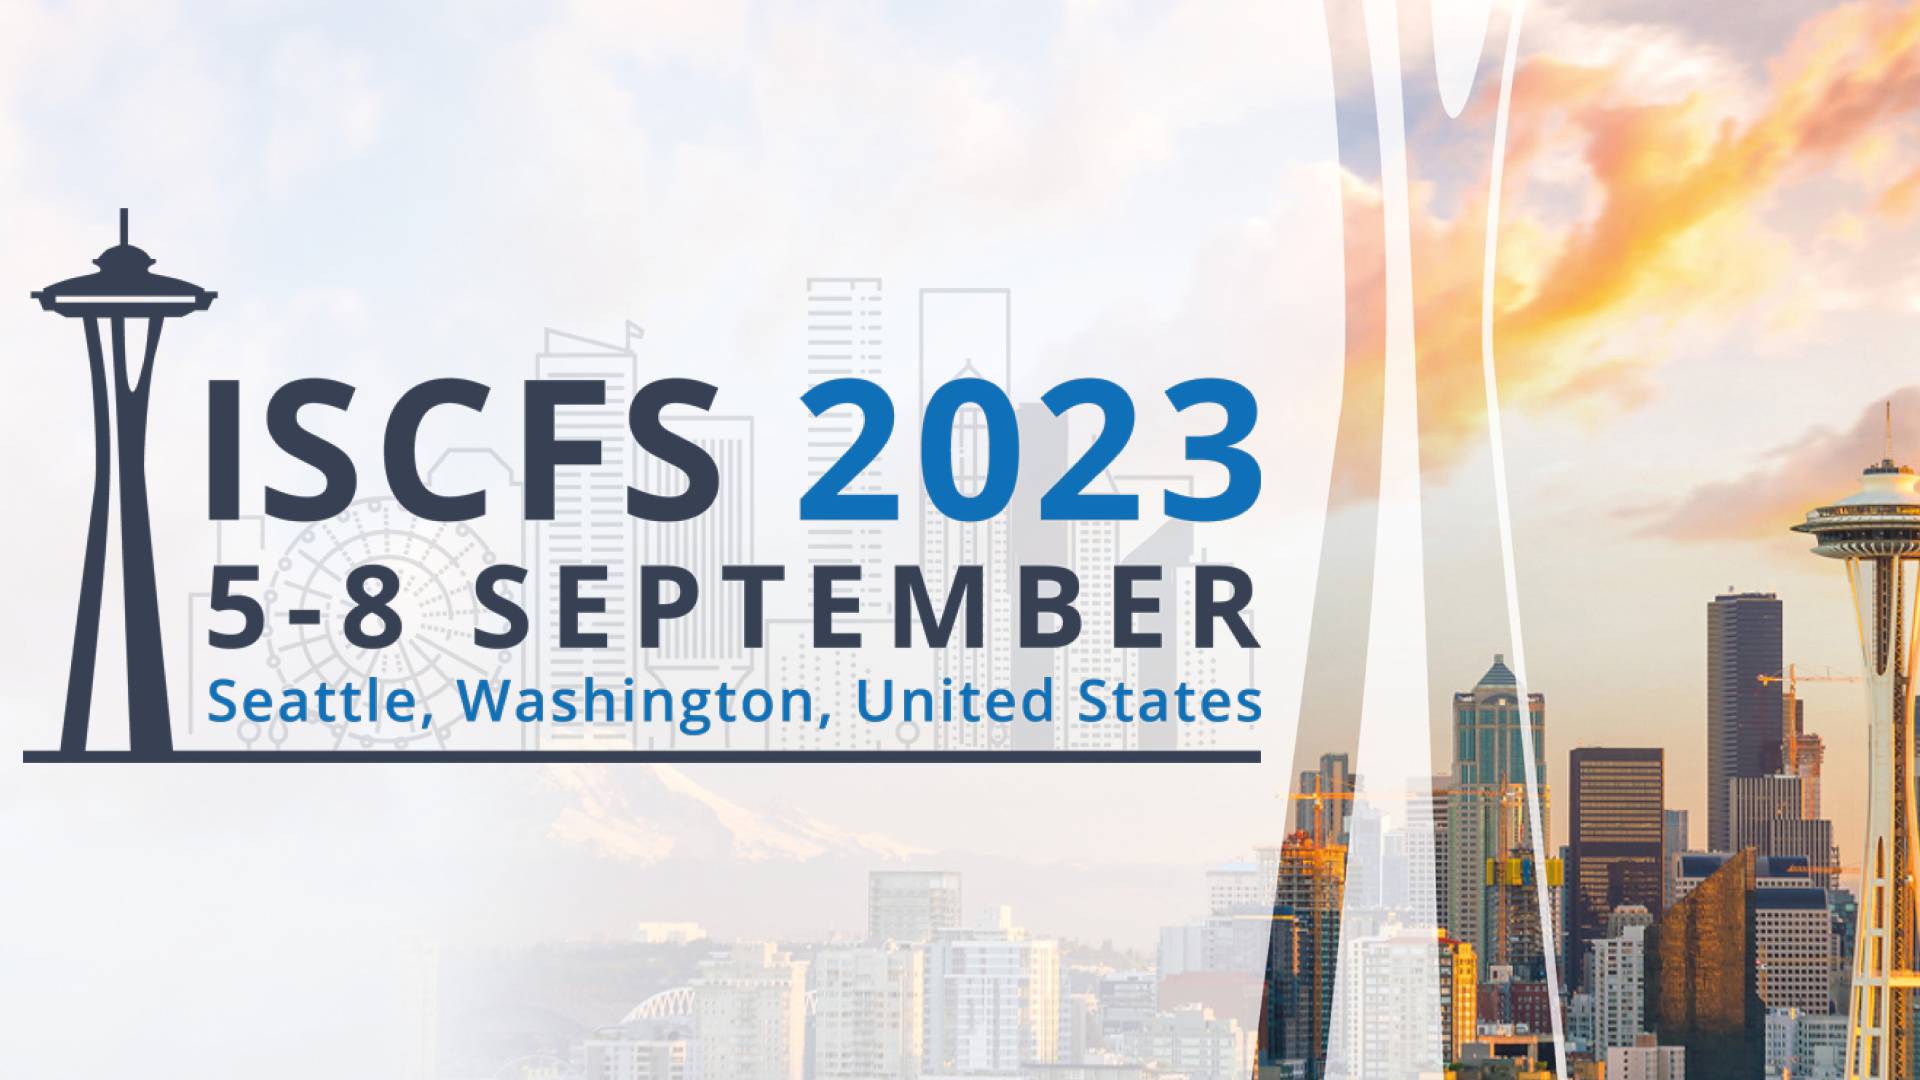 Steve Mottram attends the 2023 ISCFS Conference